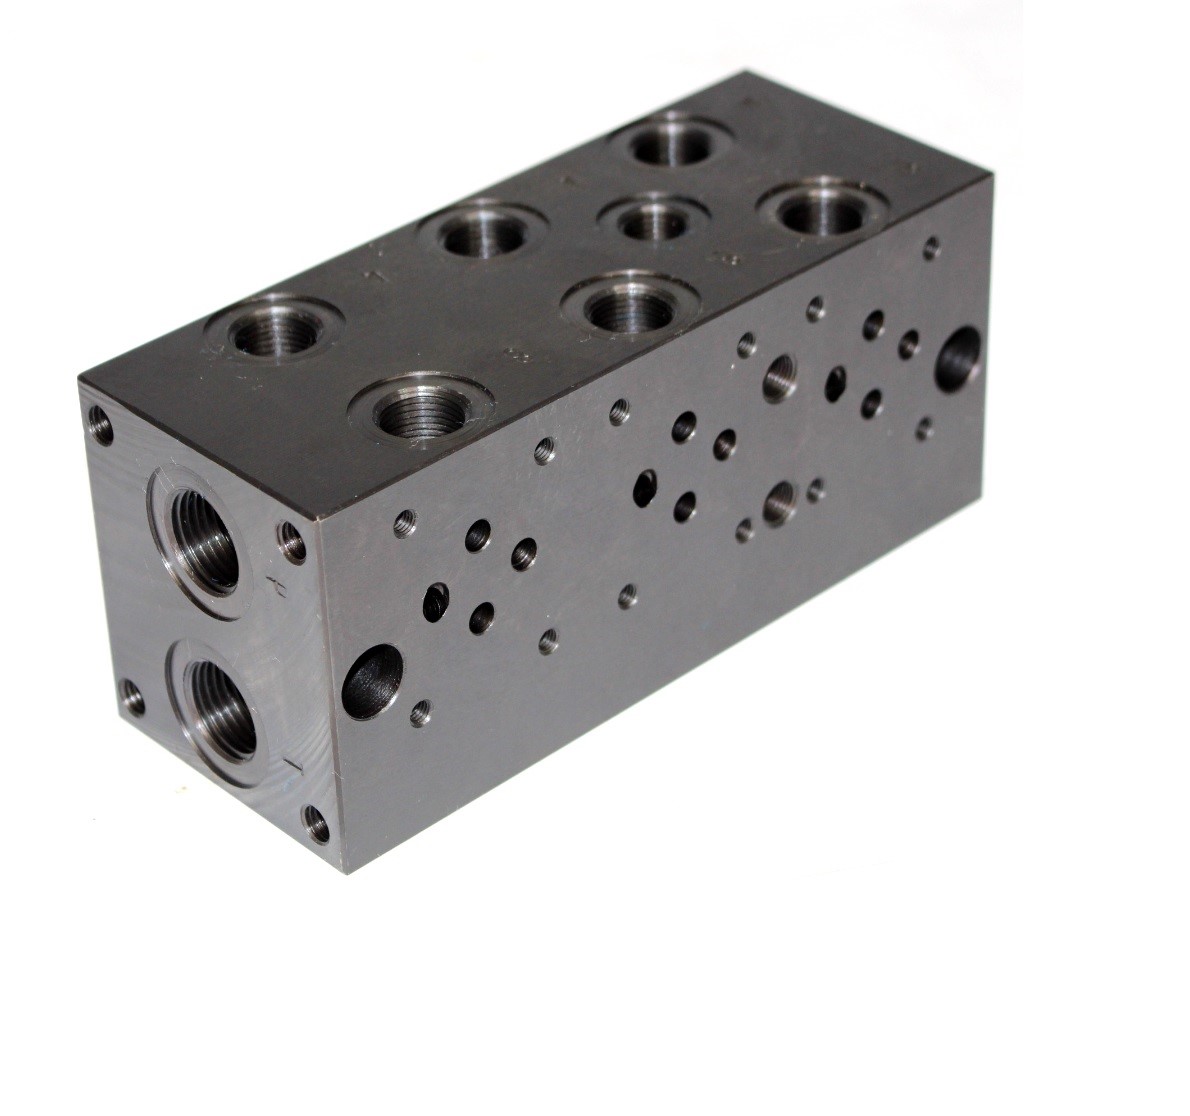 Flowfit cetop 3, 3 station steel manifold with relief valve cavity